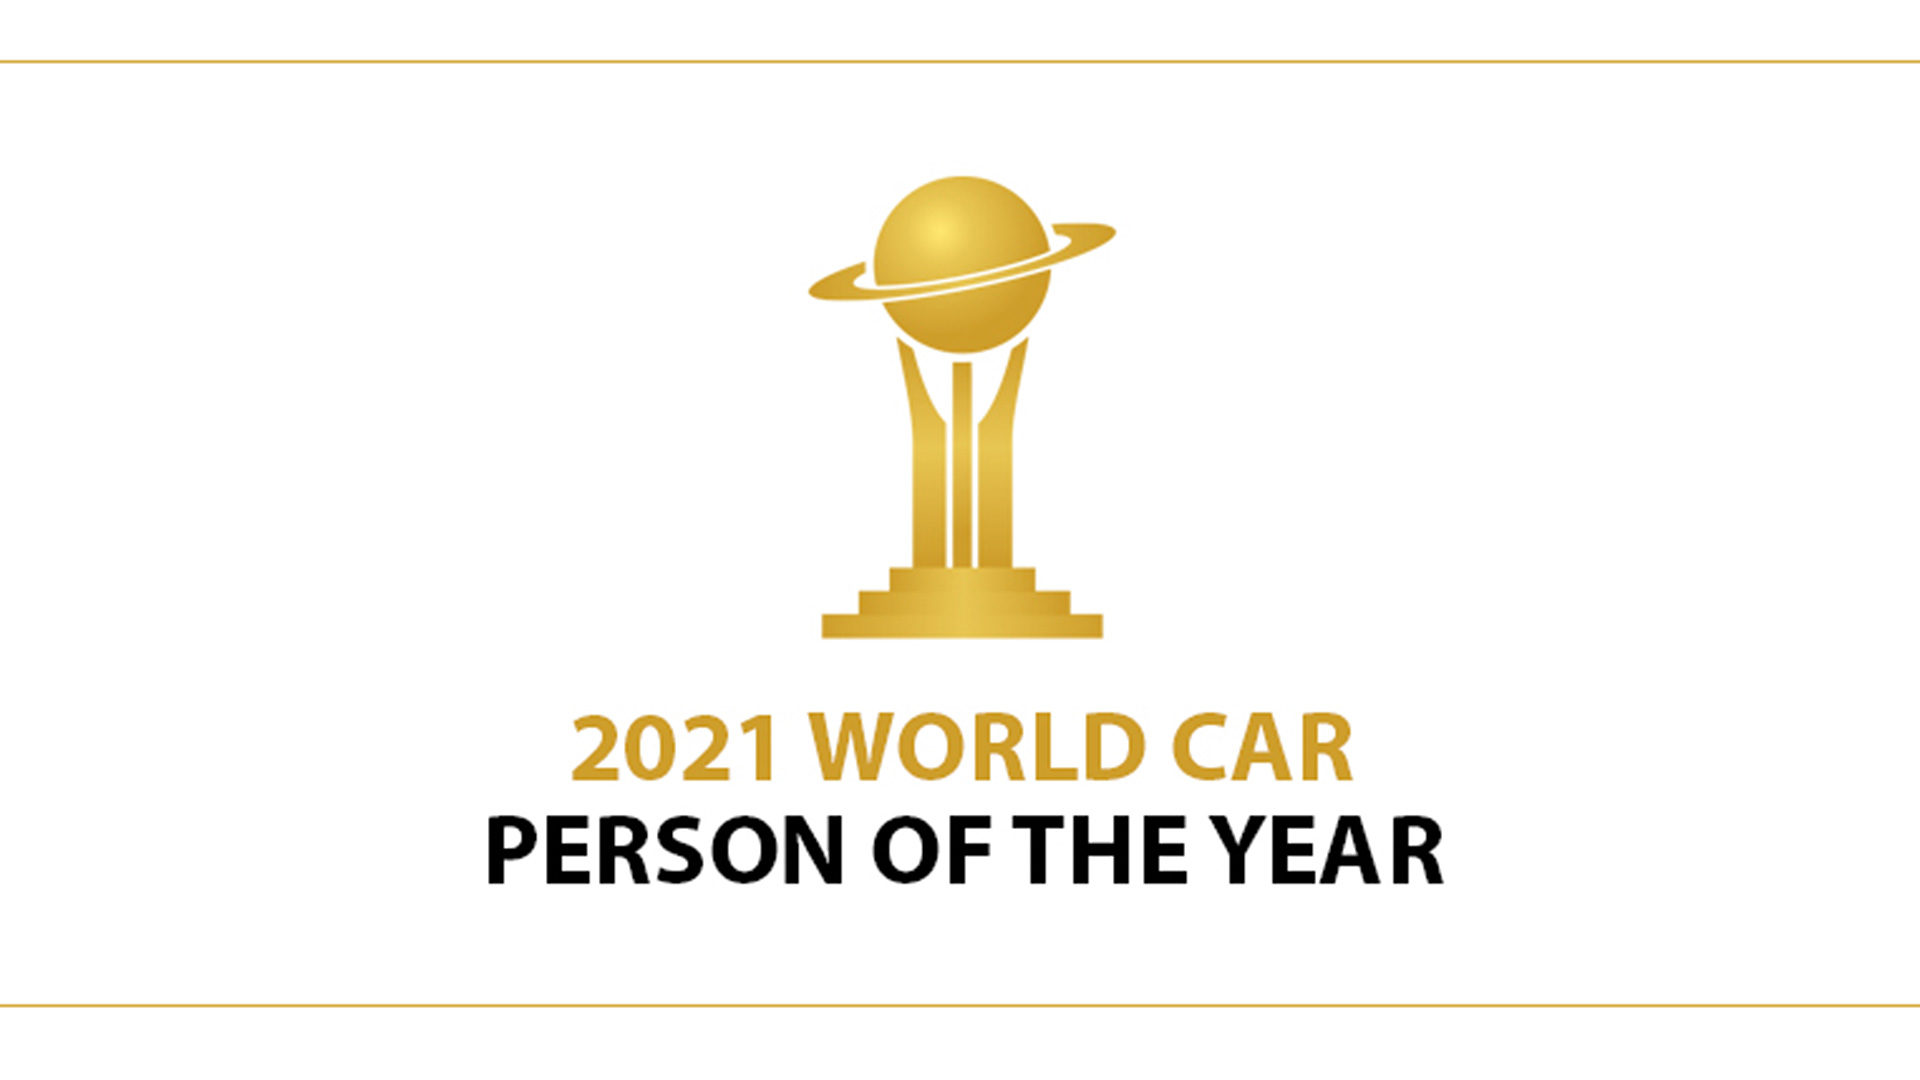 2021 World Car Person of the Year logo